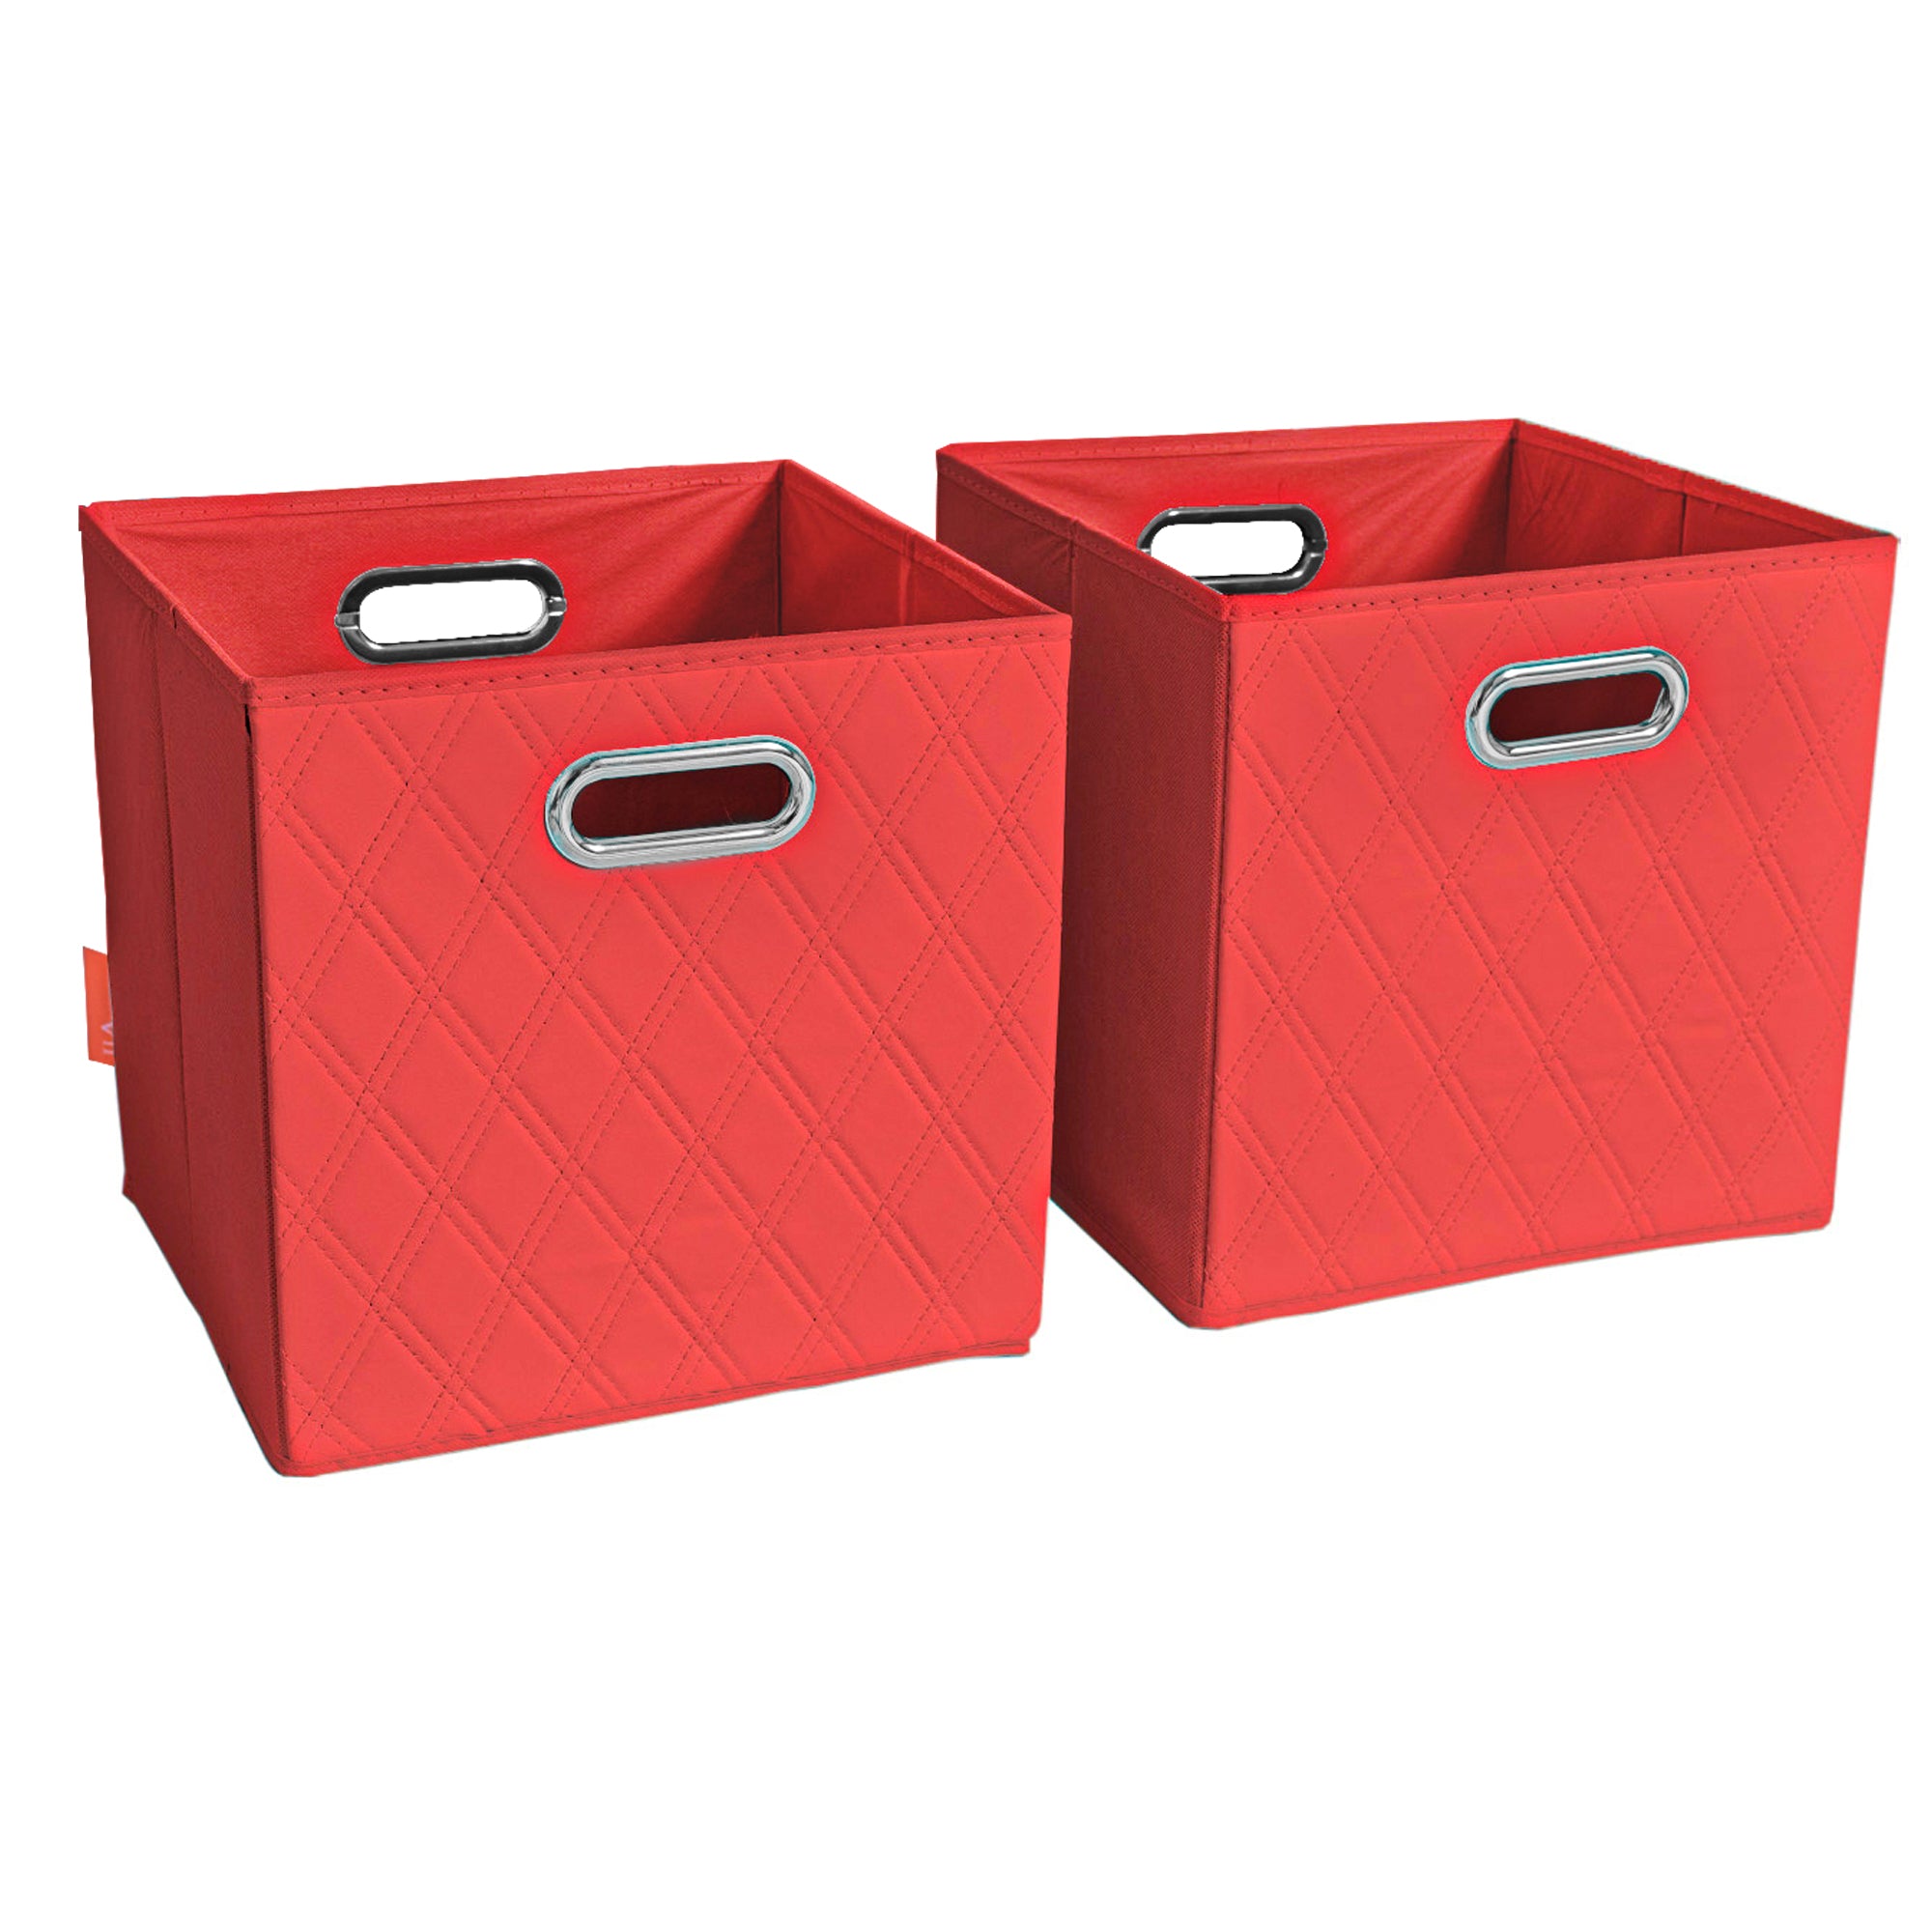 JIAessentials 13 inch Foldable Diamond Patterned Faux Leather Storage Cube Bins Set of Two with Dual Handles - 13" Red